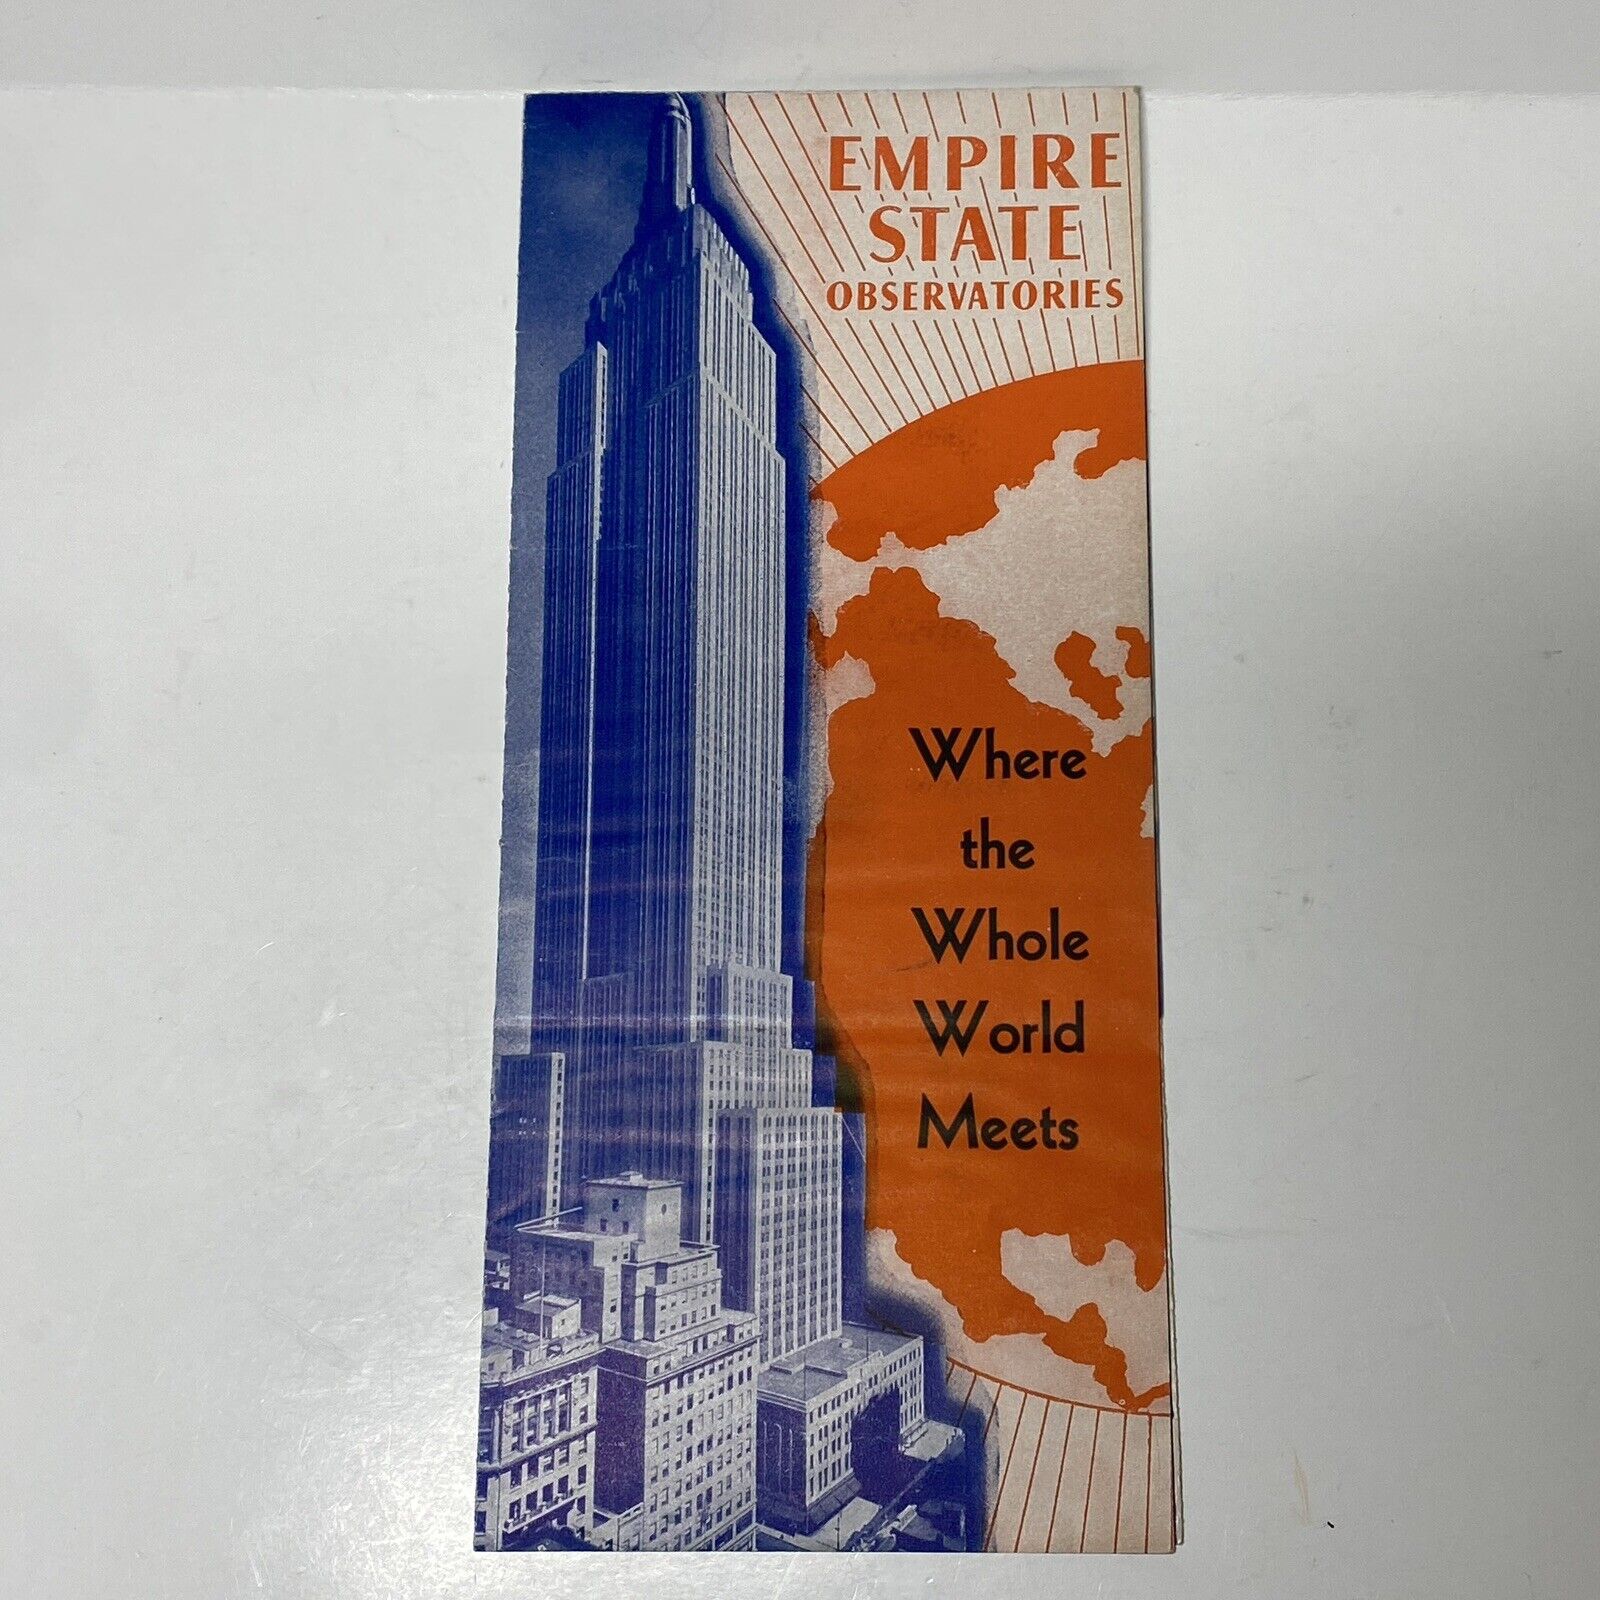 1940s Empire State Building Observatories NYC Promotional Tourist Brochure ￼